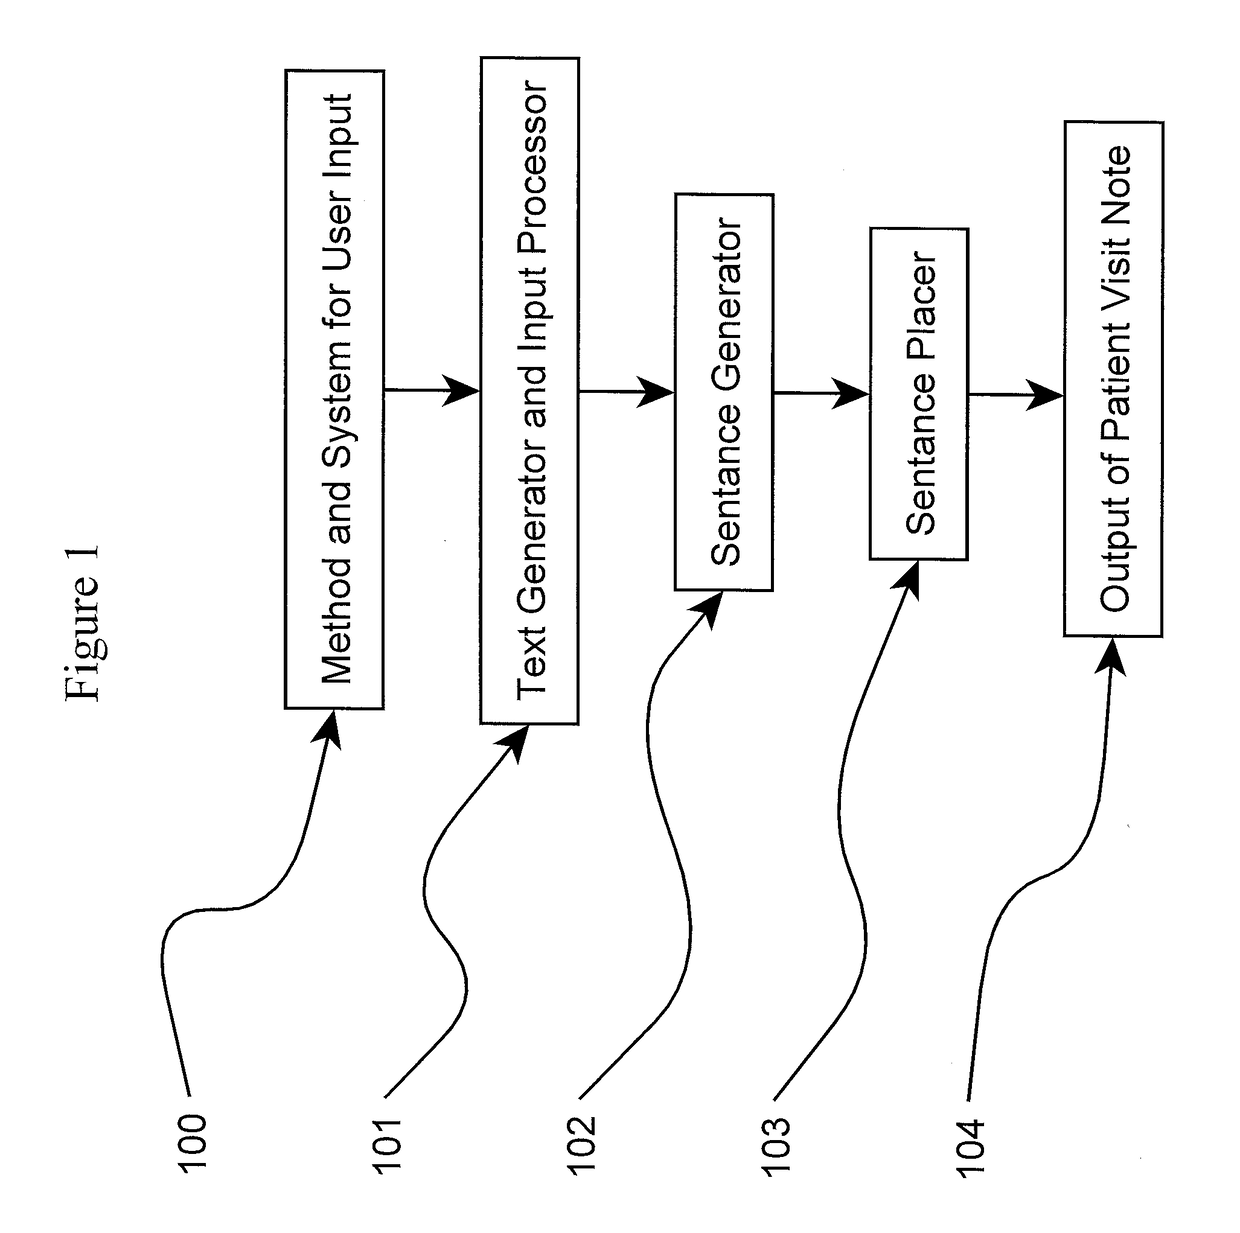 System and Methods for Narrative Patient Visit Note Generation